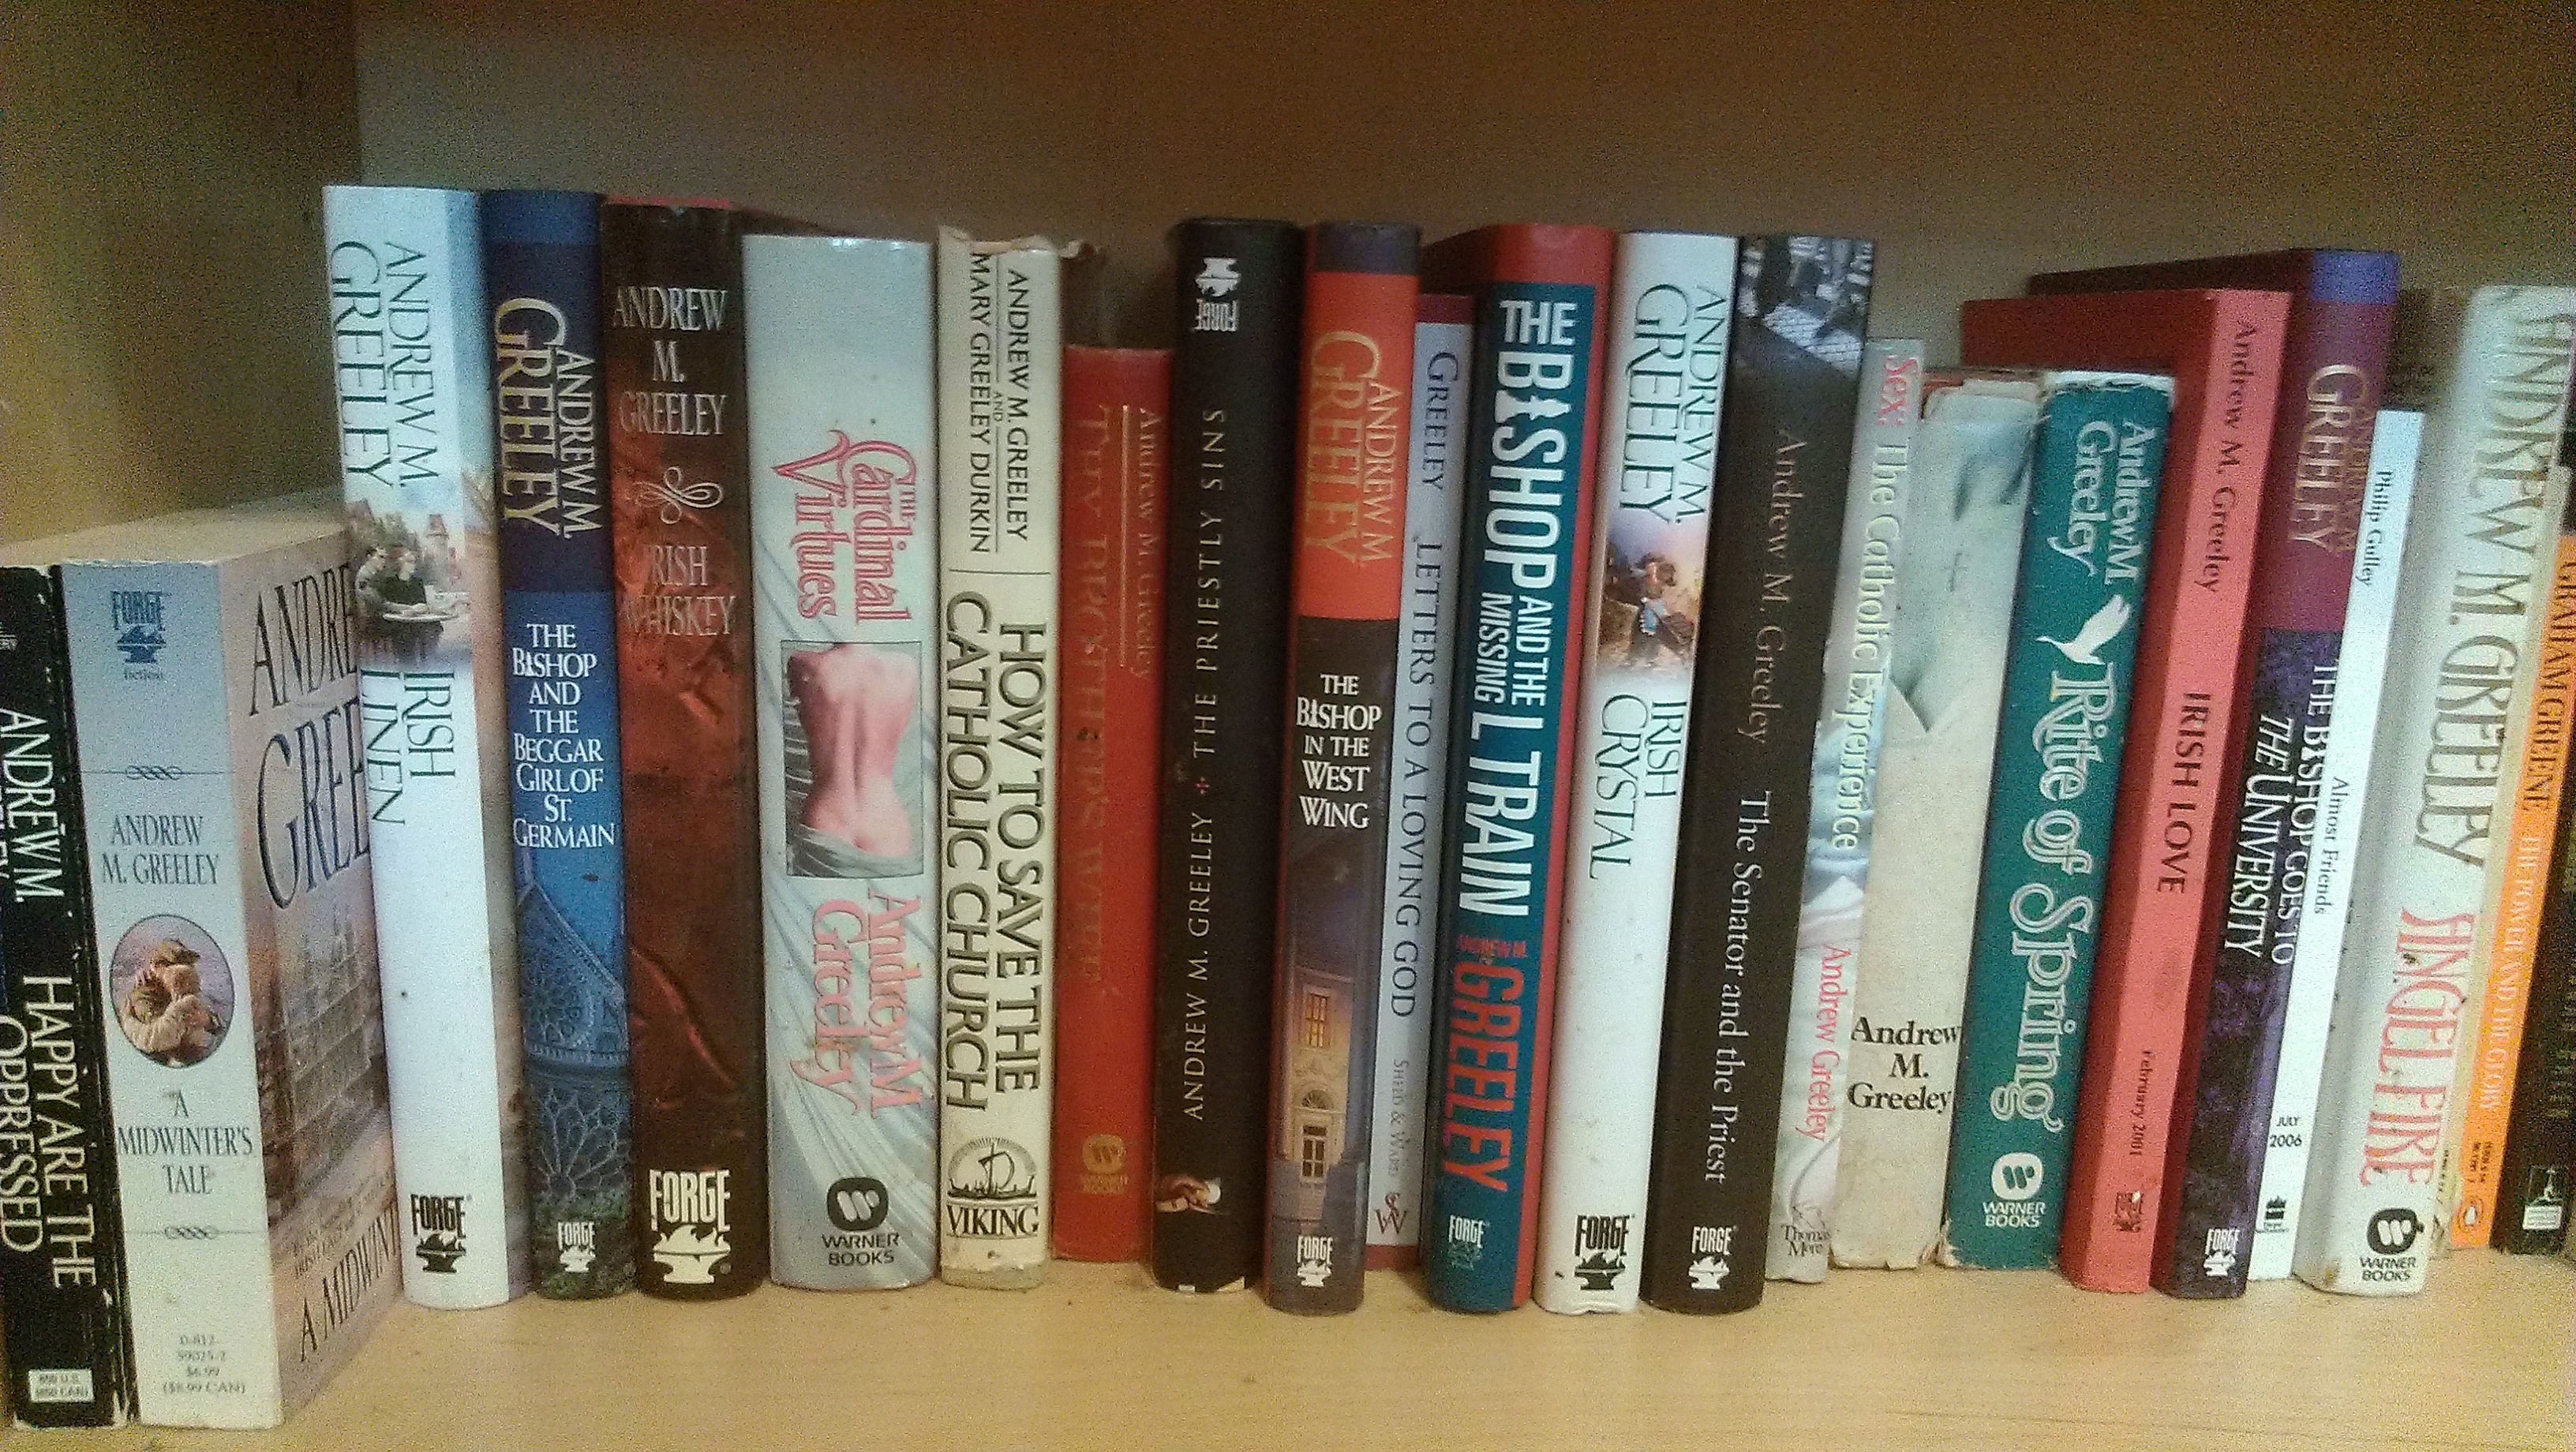 The Andrew Greeley section of my bookshelf.